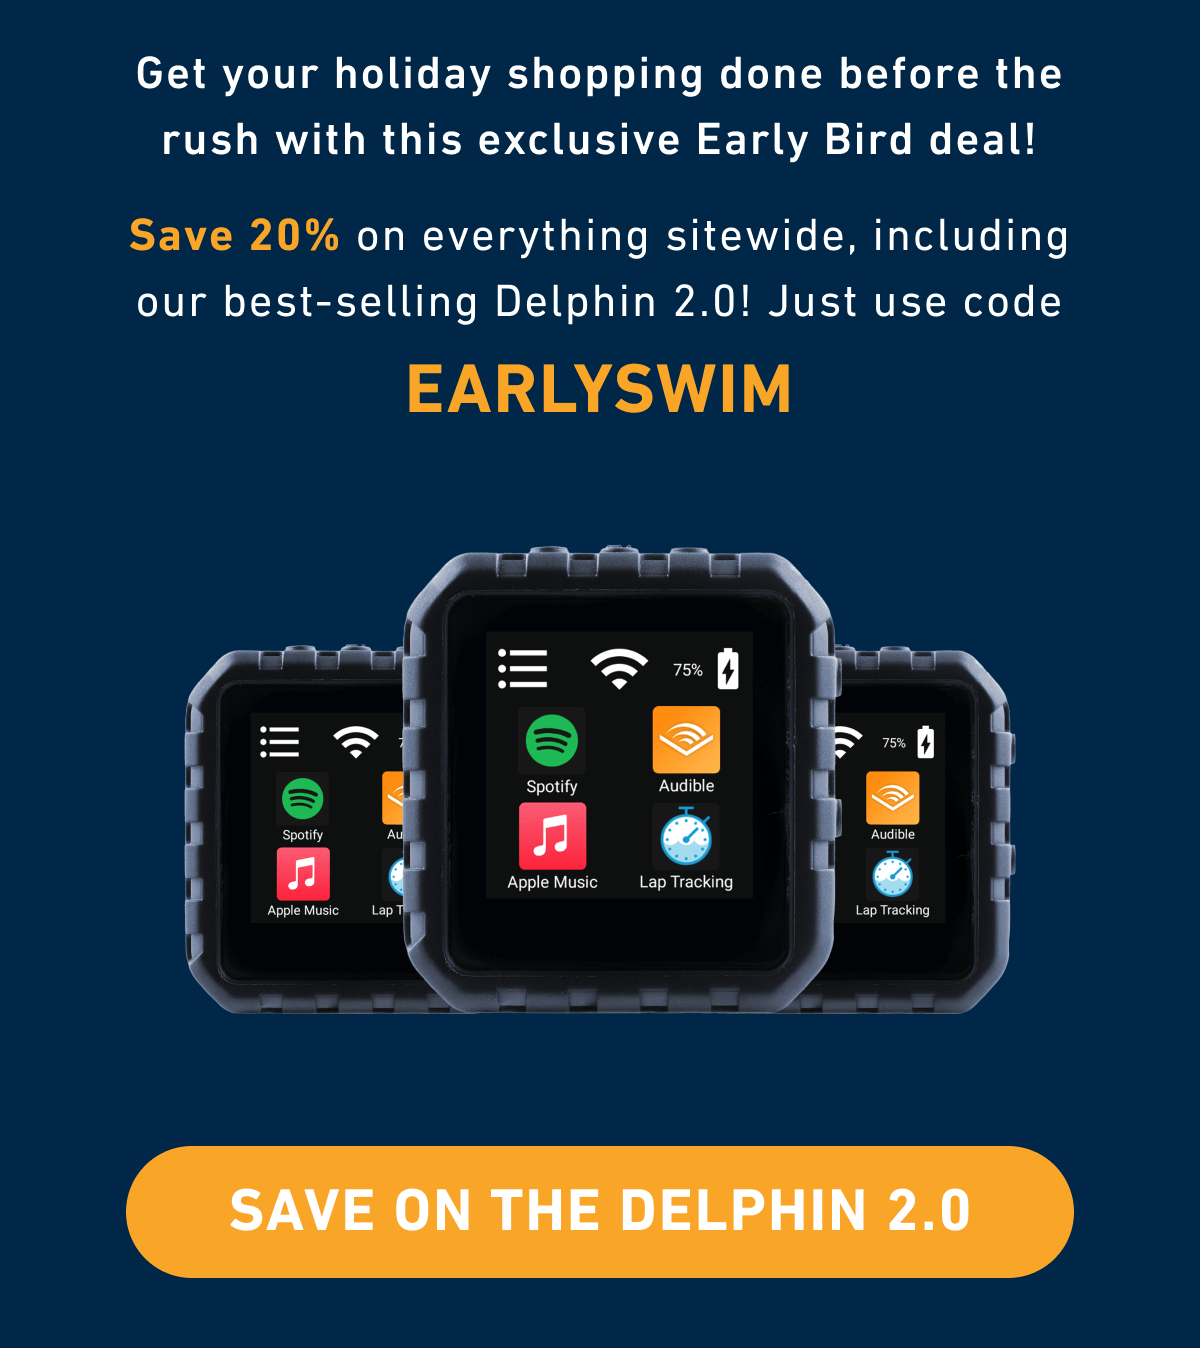 Save on the Delphin 2.0